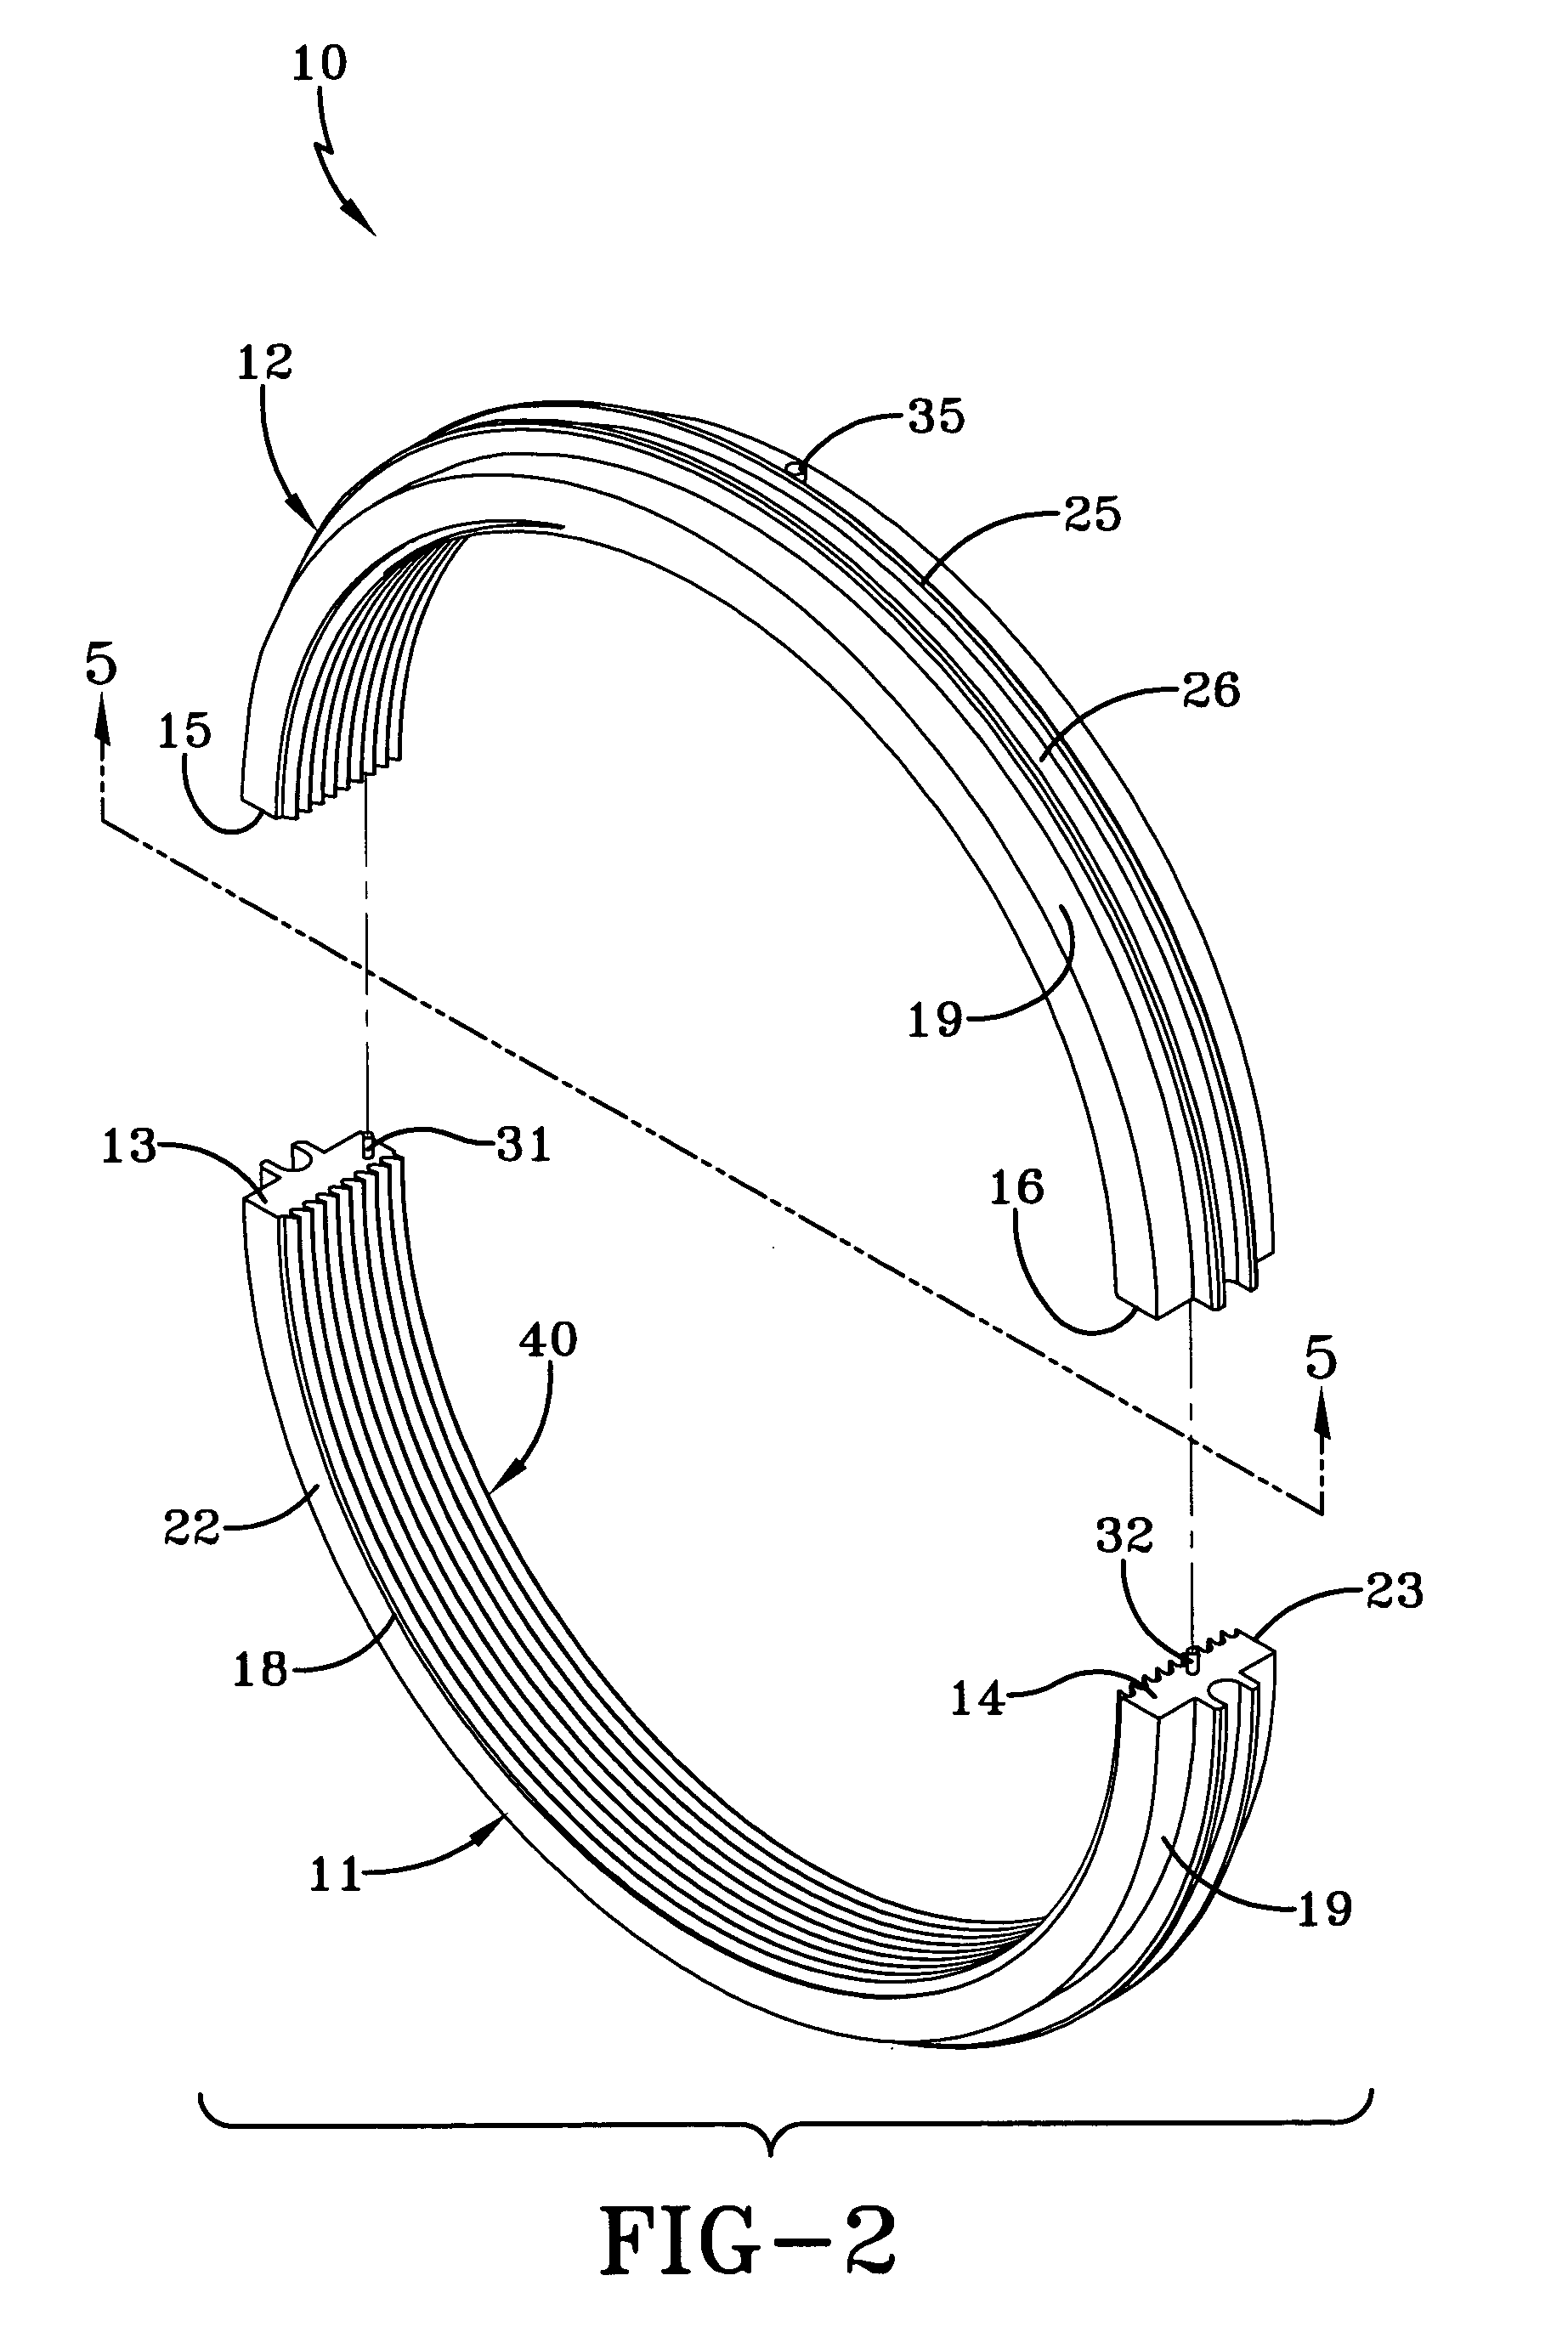 Windback labyrinth seal that accommodates a pressure differential for rotating shafts